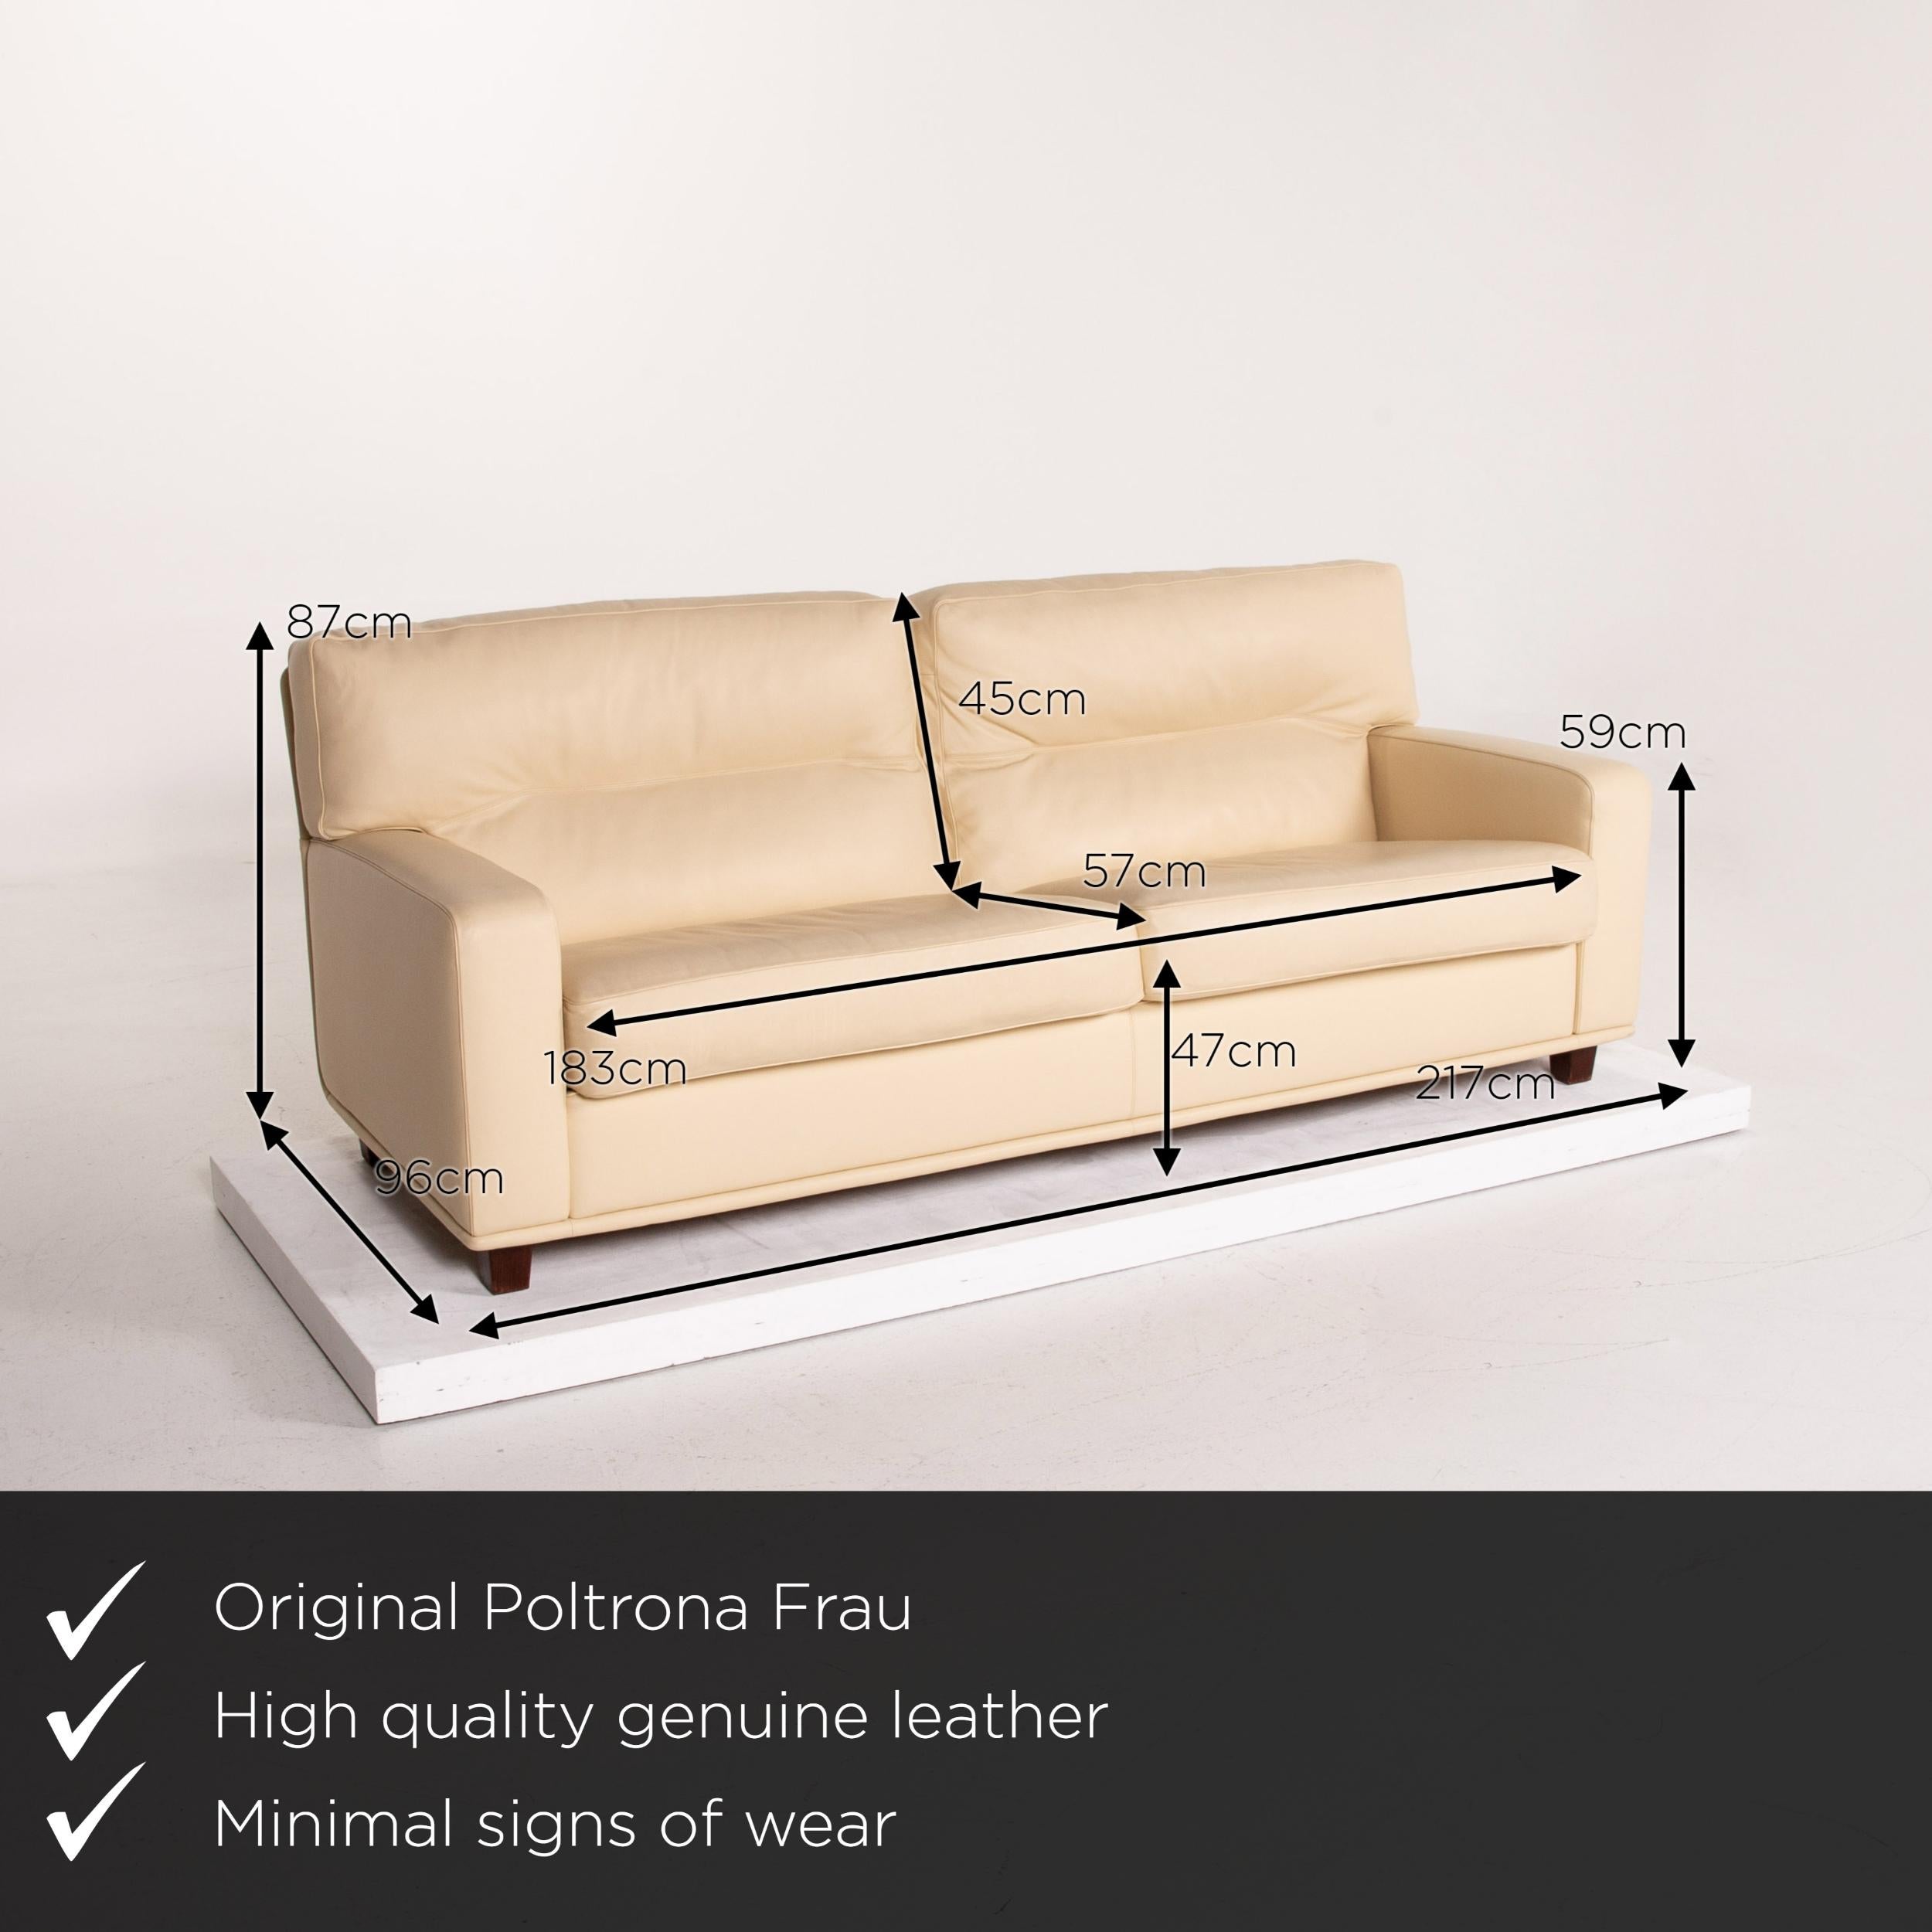 We present to you a Poltrona Frau leather sofa cream two-seat couch.

 

 Product measurements in centimeters:
 

Depth 96
Width 217
Height 87
Seat height 47
Rest height 59
Seat depth 57
Seat width 183
Back height 45.